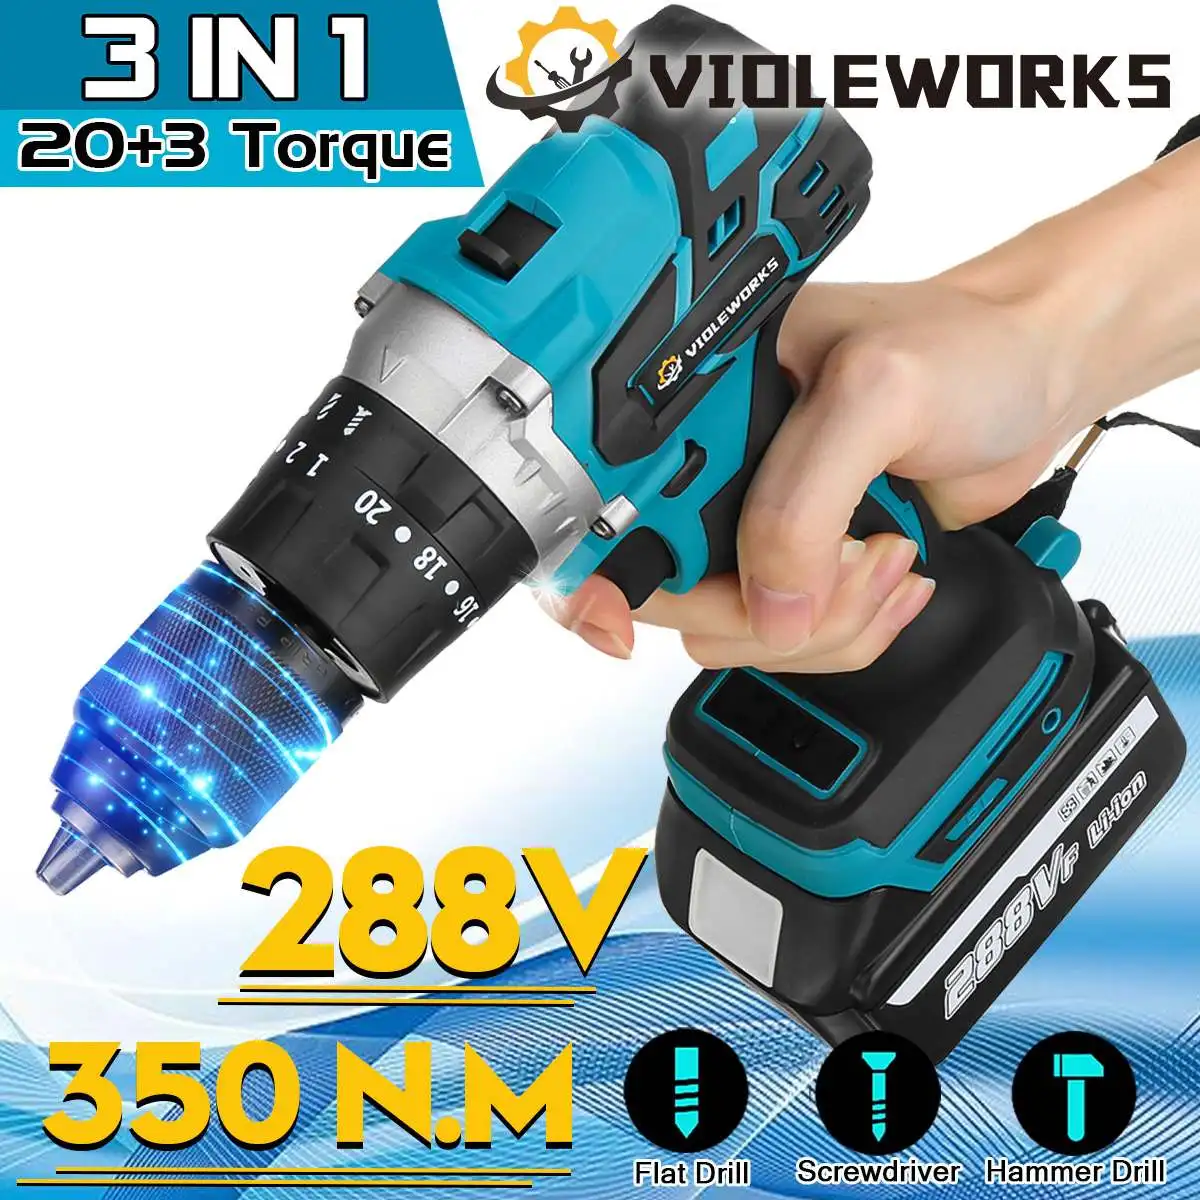 

288V 3 In 1 Brushless Electric Drill Screwdriver Variable Speed 20+3 Torque Cordless Hammer Impact Drill for Makita Battery 18V